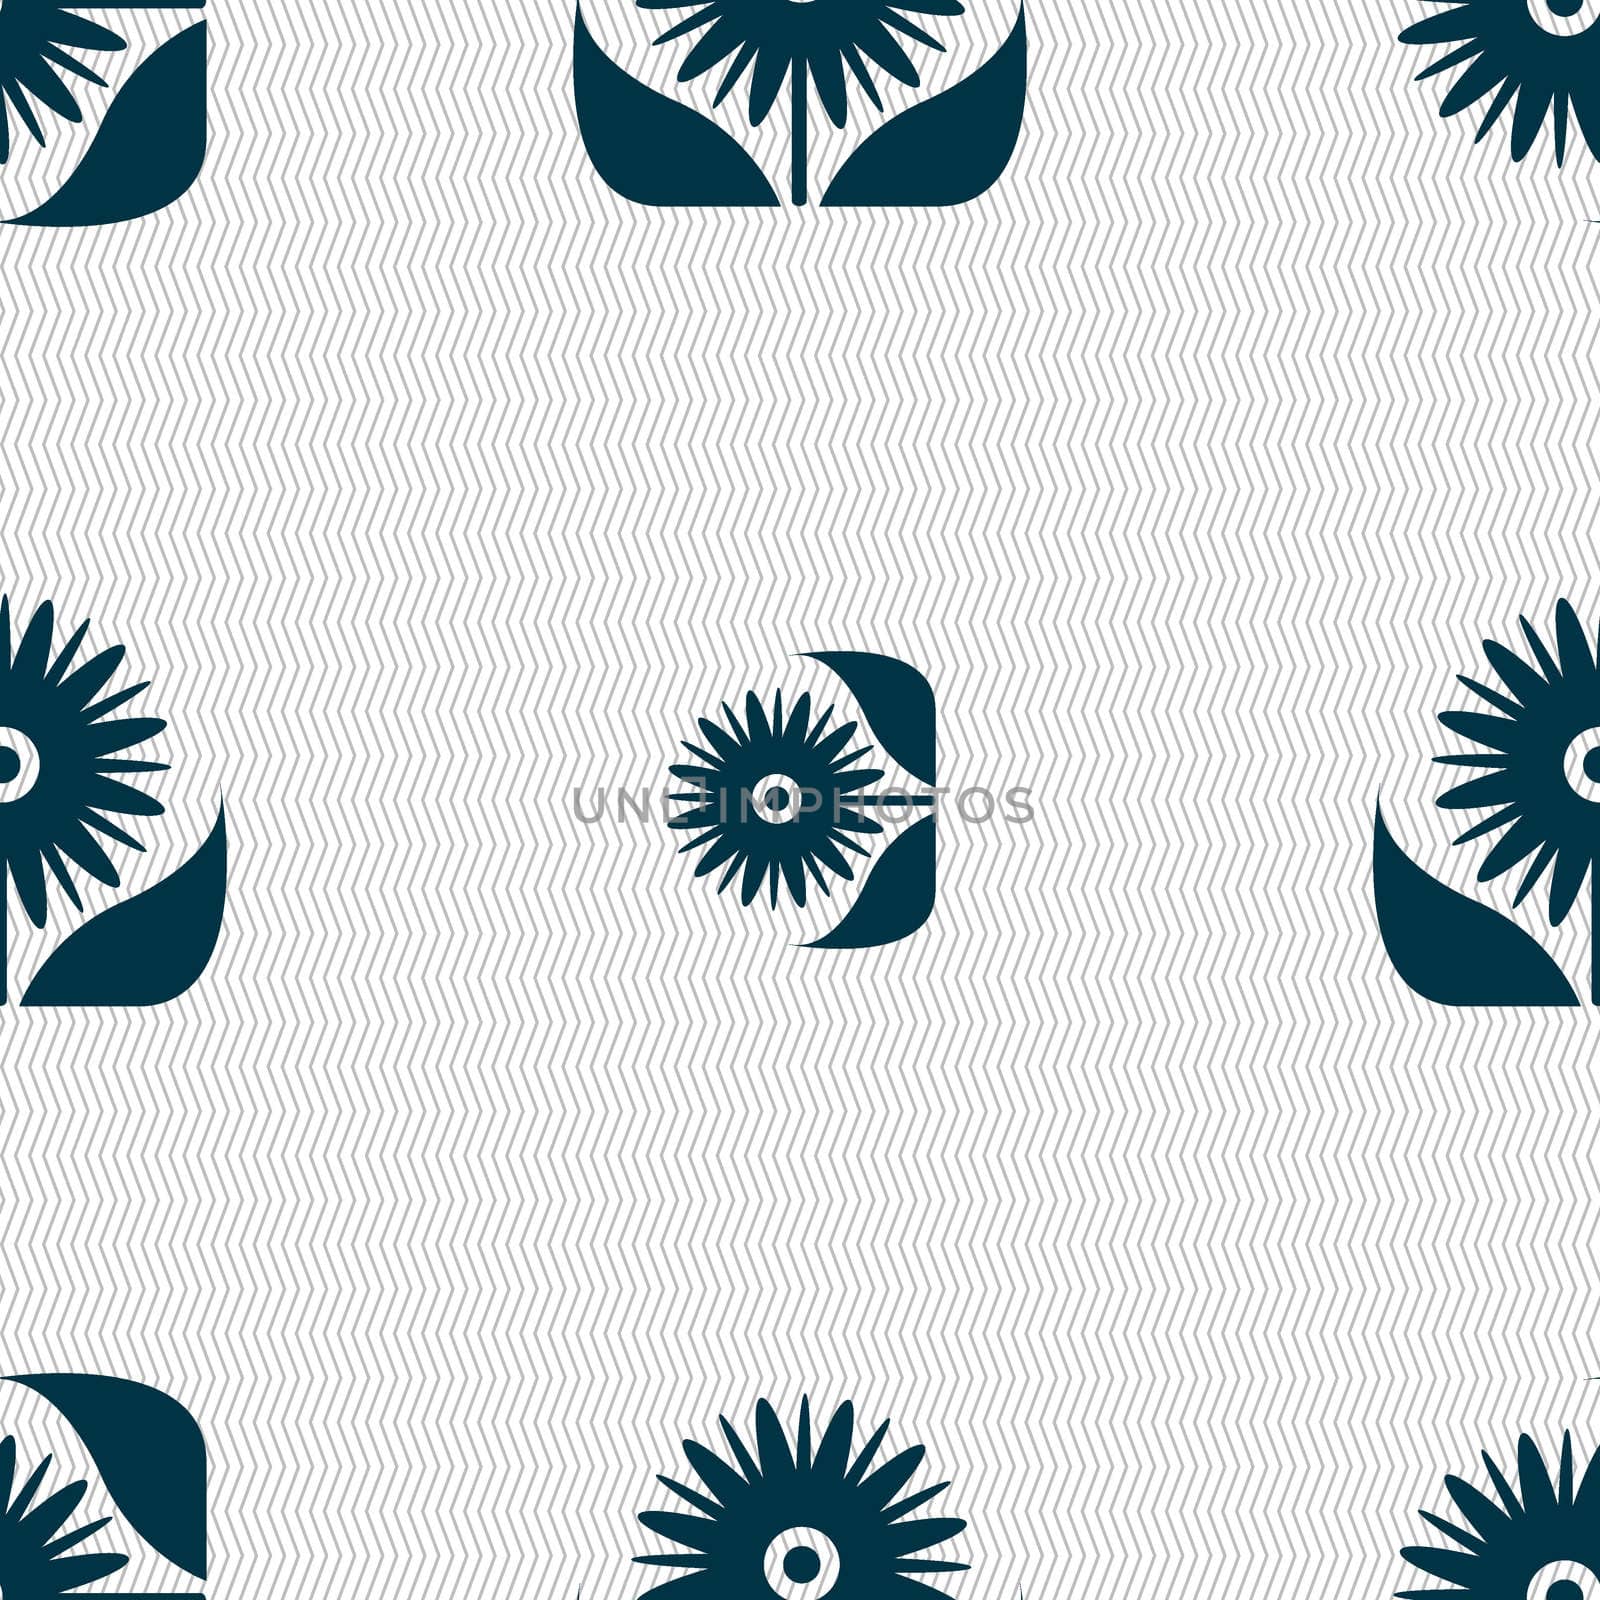 Bouquet of flowers with petals icon sign. Seamless abstract background with geometric shapes. illustration